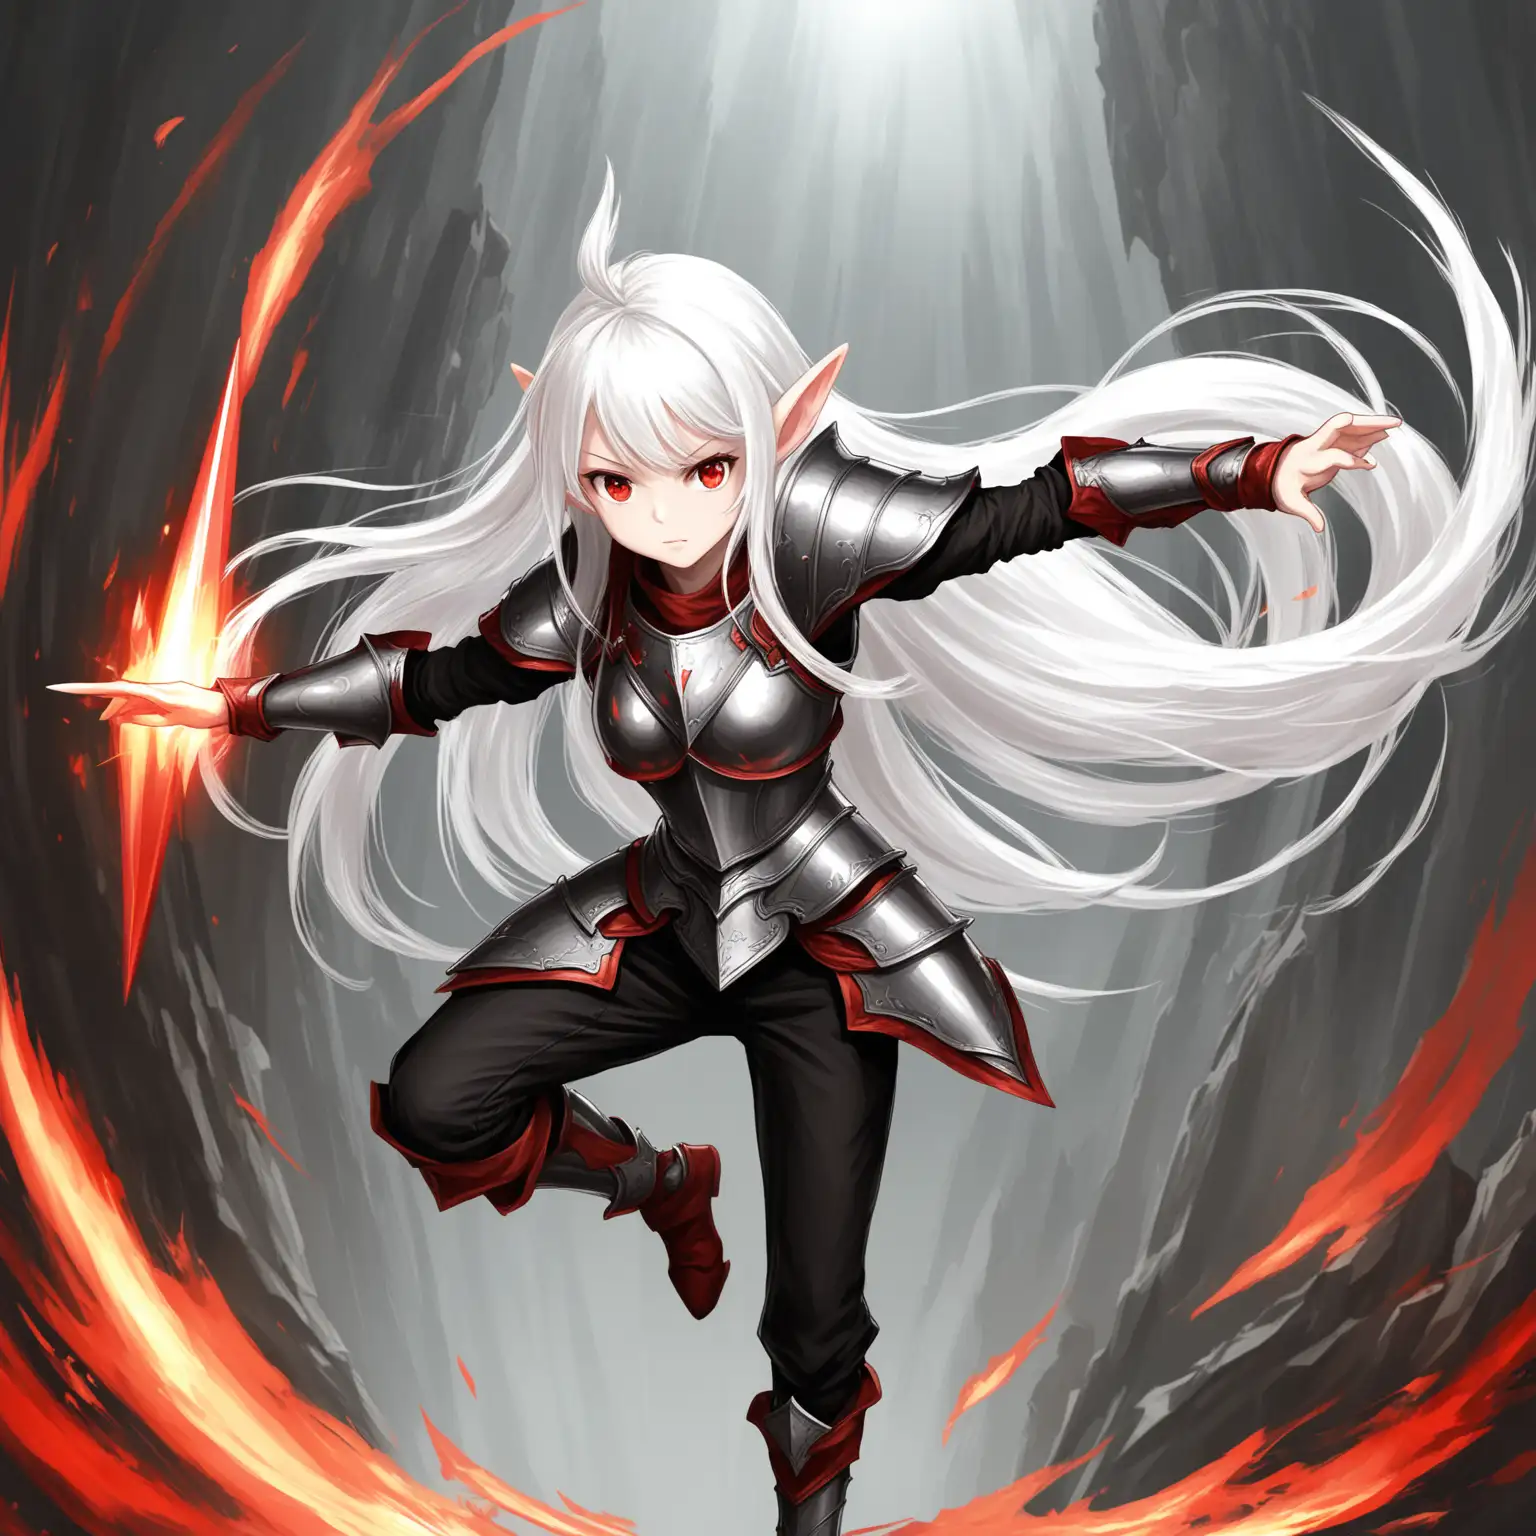 Adventurous WhiteHaired Girl with Red Eyes in Dynamic Pose and Armor